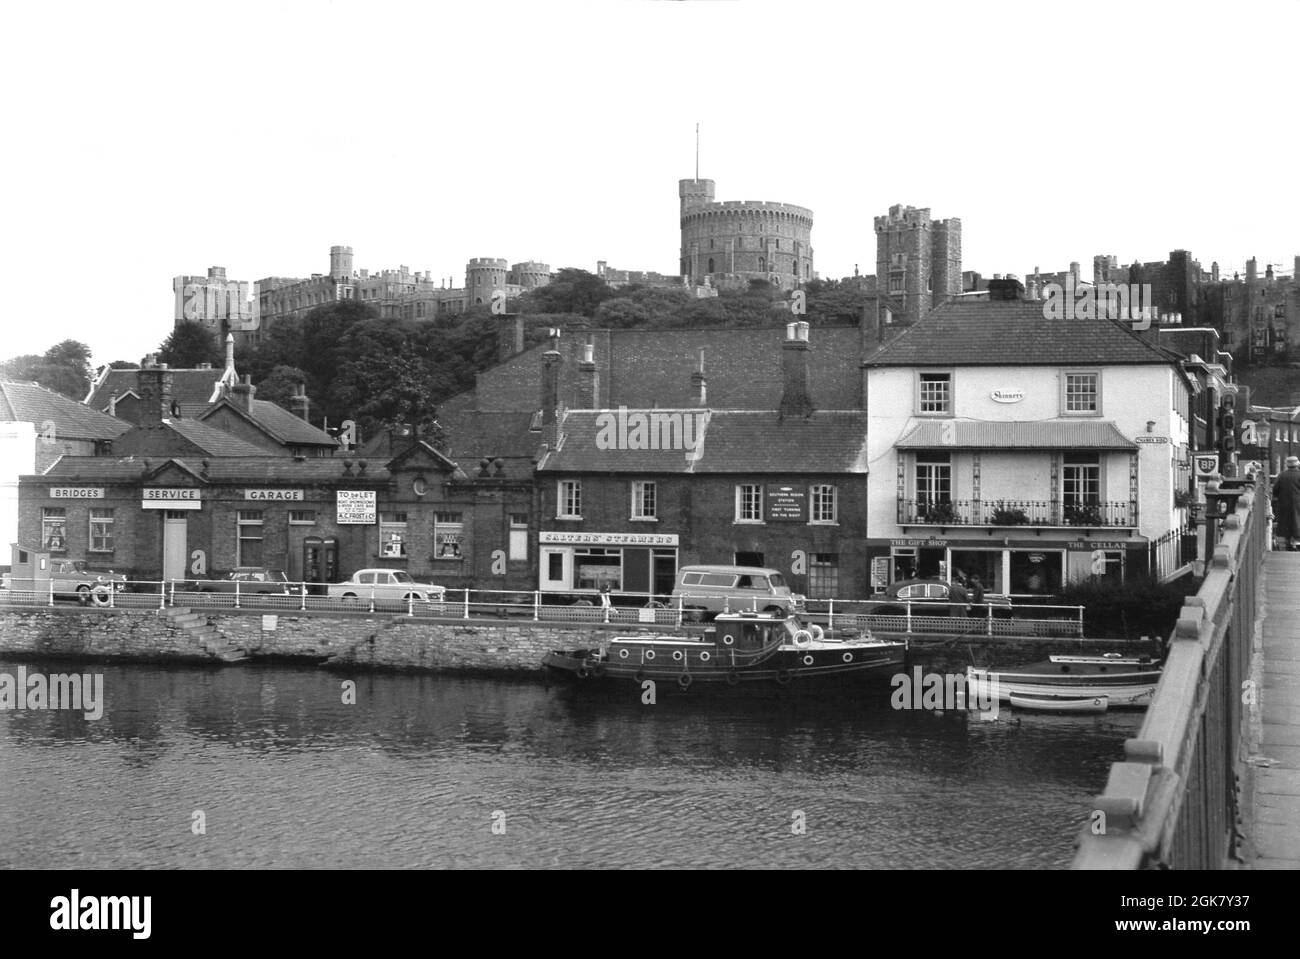 1960s, historical, taken from Windsor Bridge, we see a view of Thames Side, a street by the river Thames in the historic town of Windsor, Berkshire, England, UK. The riverside town is famous for it's historic castle - seen on the skyline in the distance - a residence of the British Royal family for over 1,000 years. Salters Steamers, who offices can be seen, were established in 1858 and operated pleasure trips up and down the river. Stock Photo